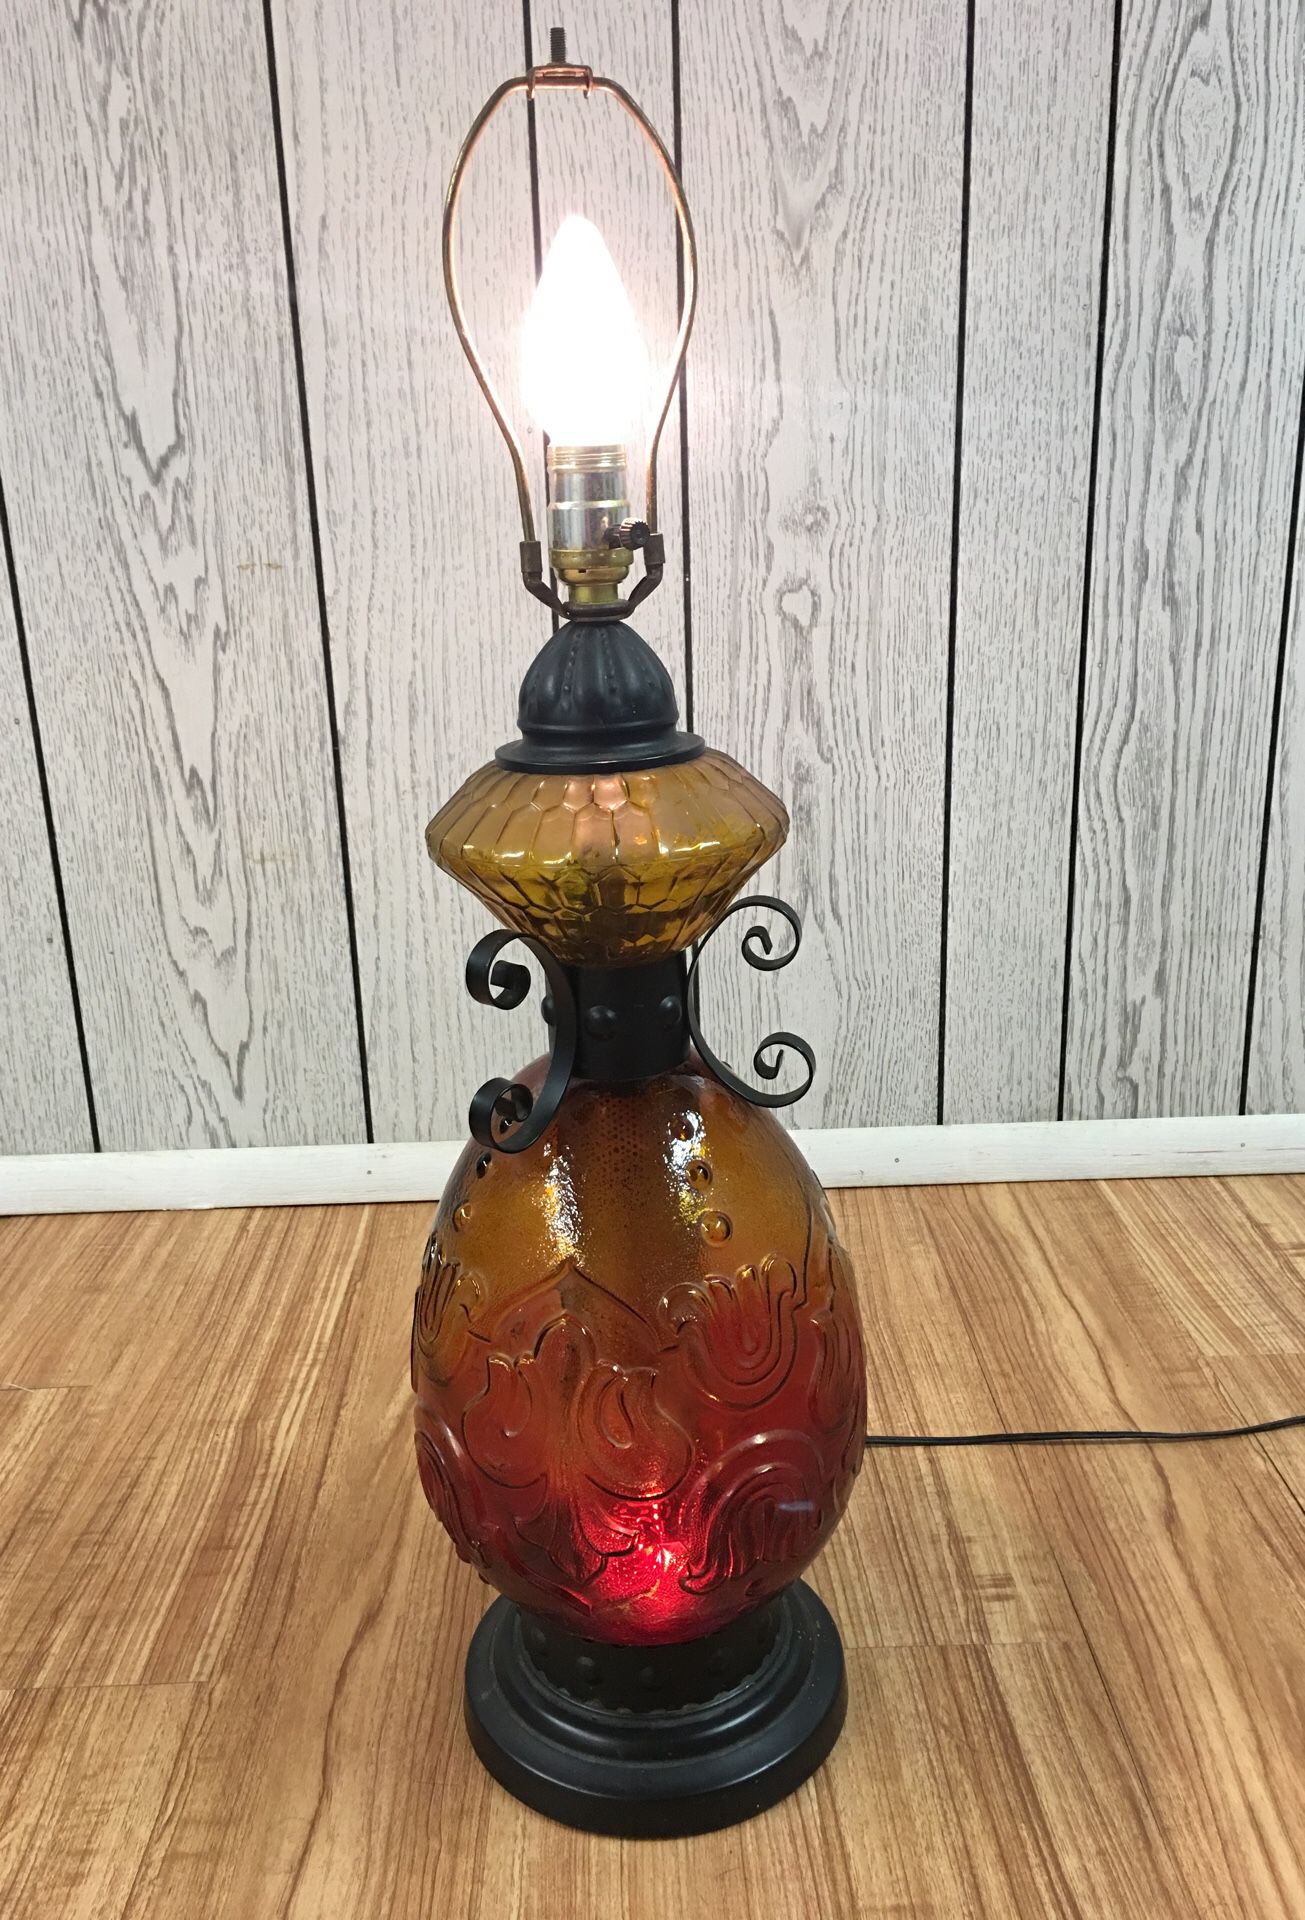 Antique lamp with two lights - missing shade